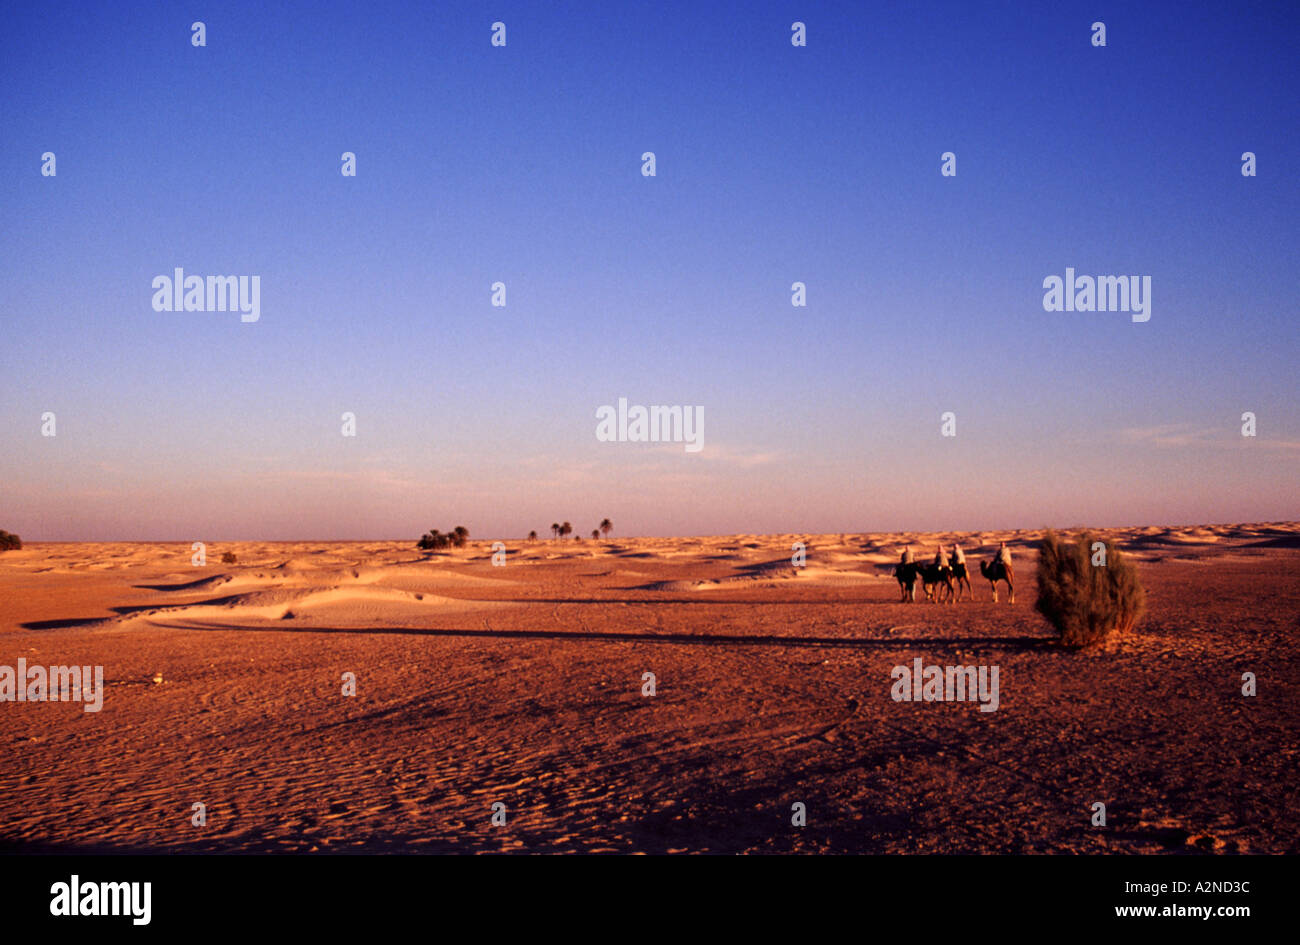 LONELIEST PLACES 01 the sahara desert tunisia africa THIS IS 1 OF 2 SIMILAR PICS AND 1 OF 200 TOTAL PICS Stock Photo